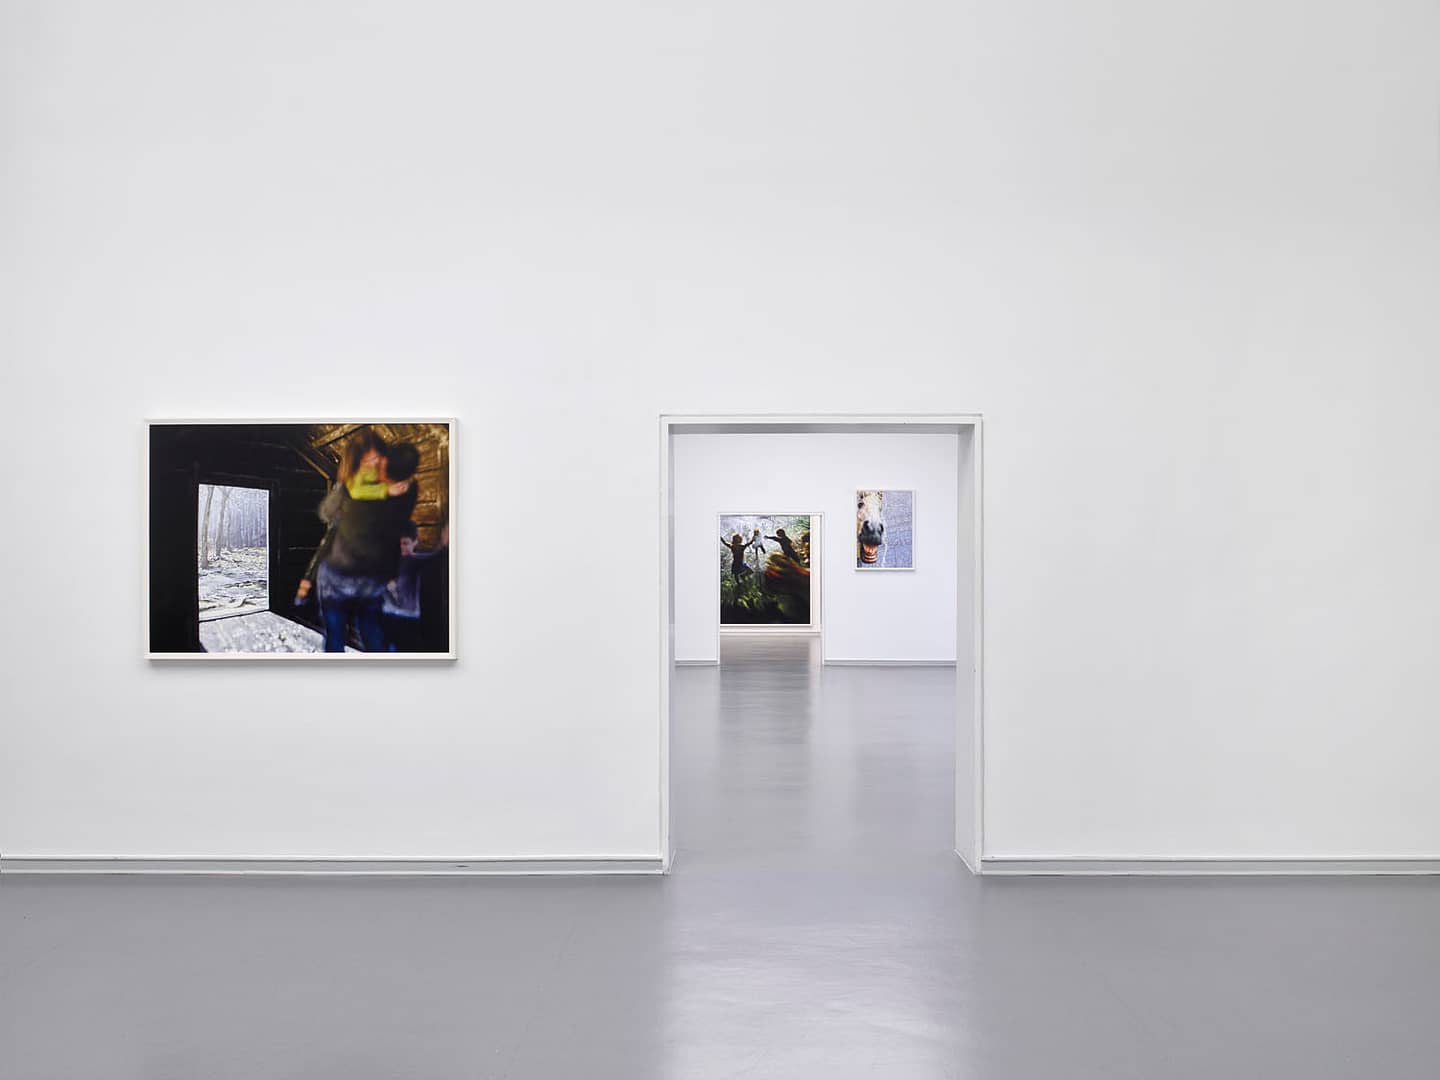 Exhibition view of Philipp Fröhlich's solo show Märchen at Von der Heydt Kunsthalle Barmen, produced by Kunst- und Museumsverein Wuppertal. The image shows various paintings based on popular fairy tales, hanging at the exhibition.